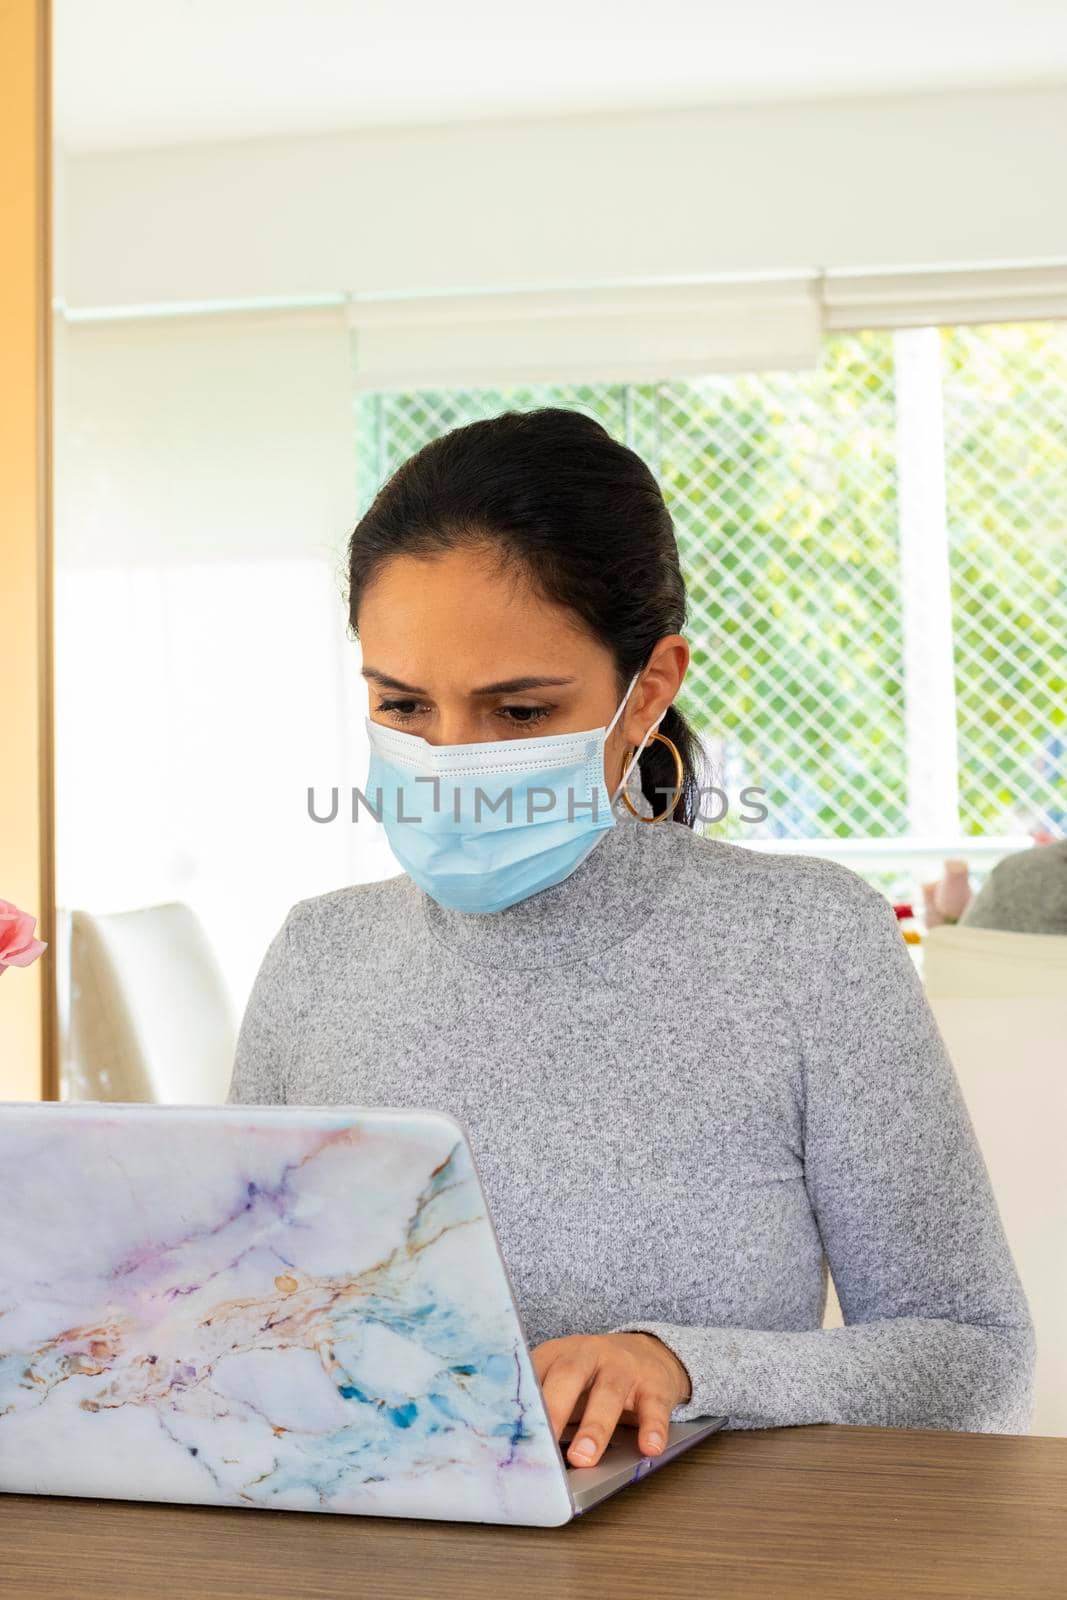 Beautiful Latin woman conducting home office for the corona virus pandemic by eagg13